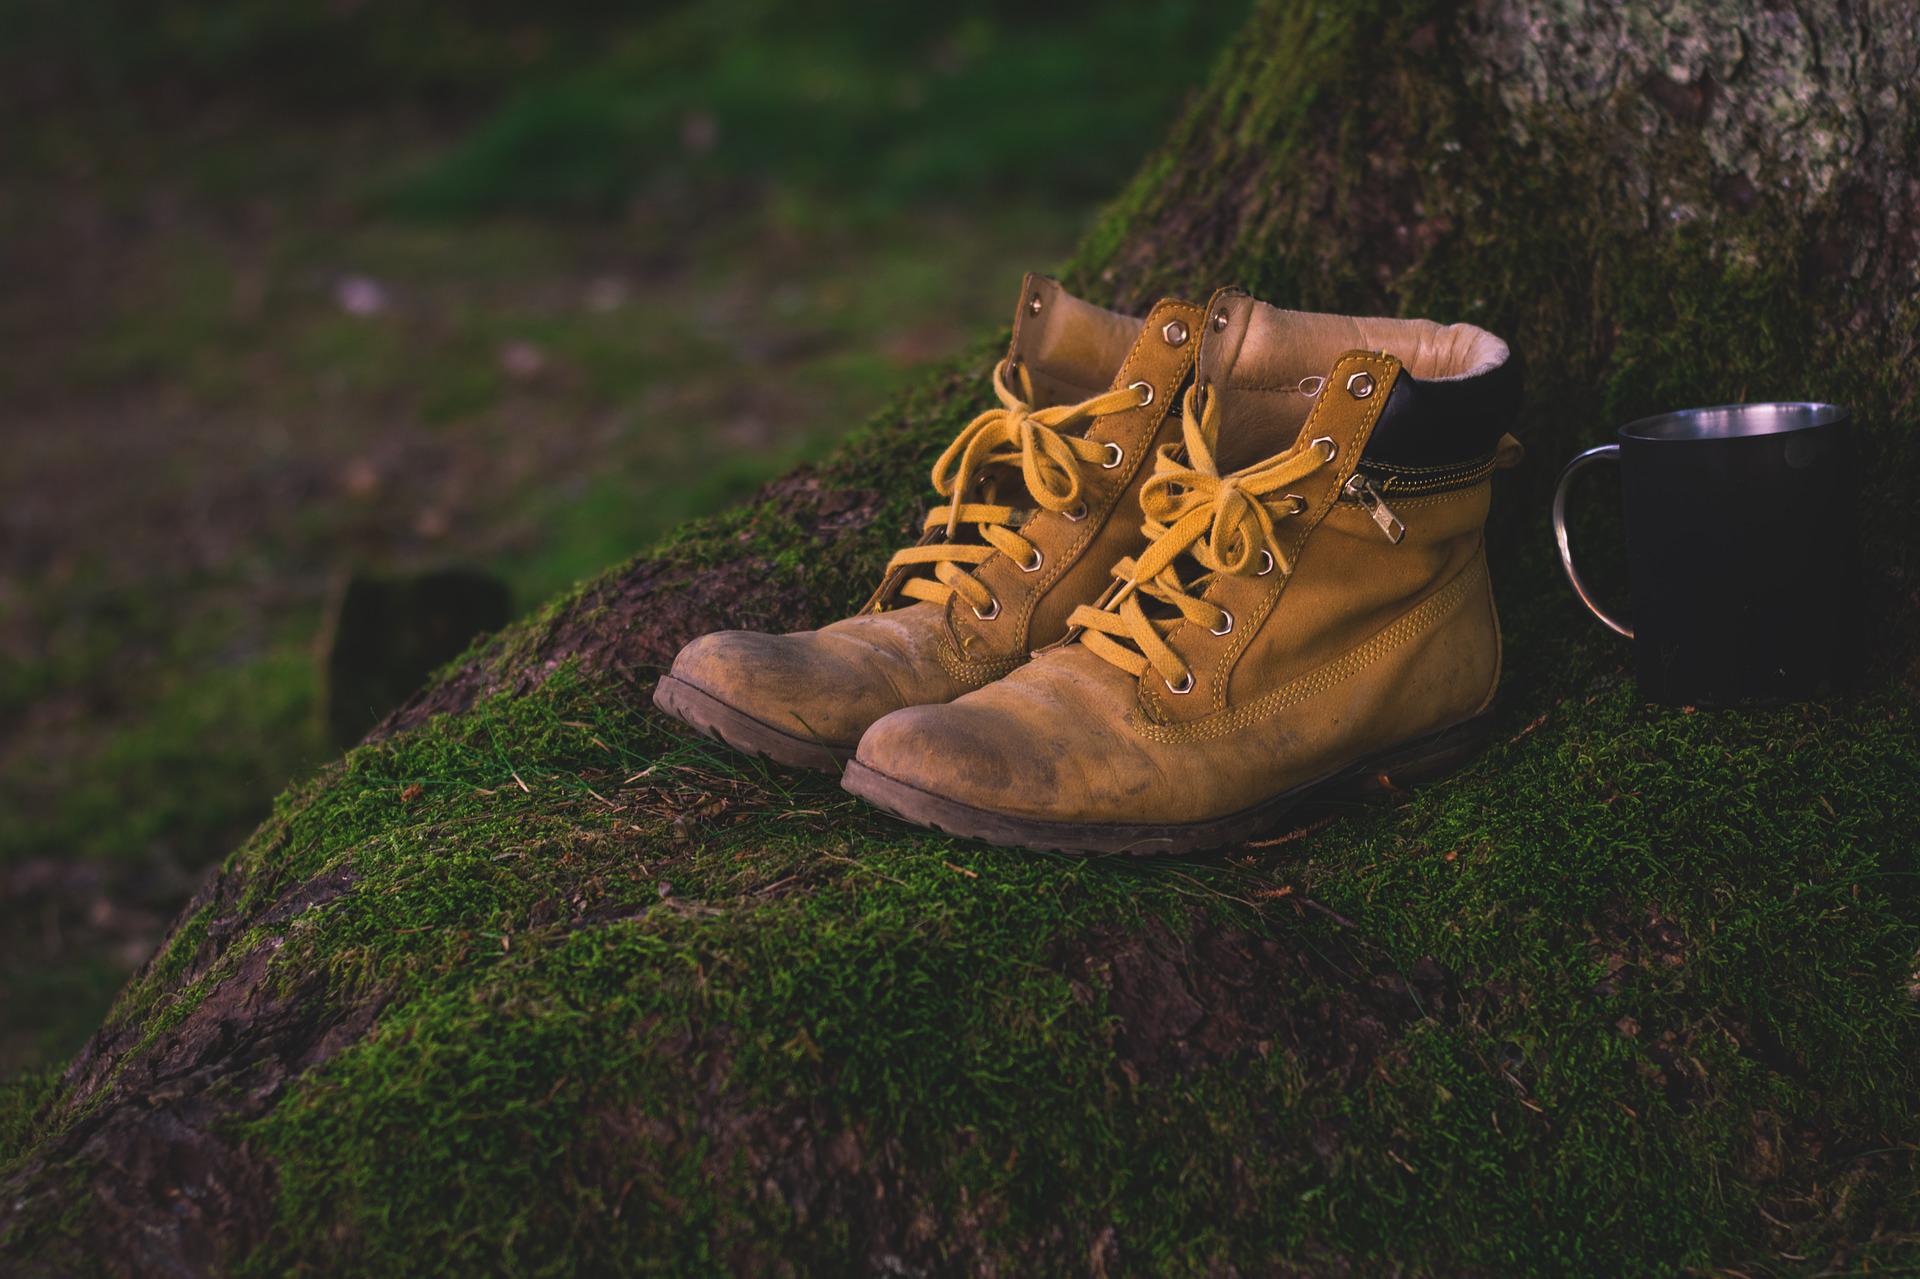 A pair of hiking boots next to a mug next to a tree